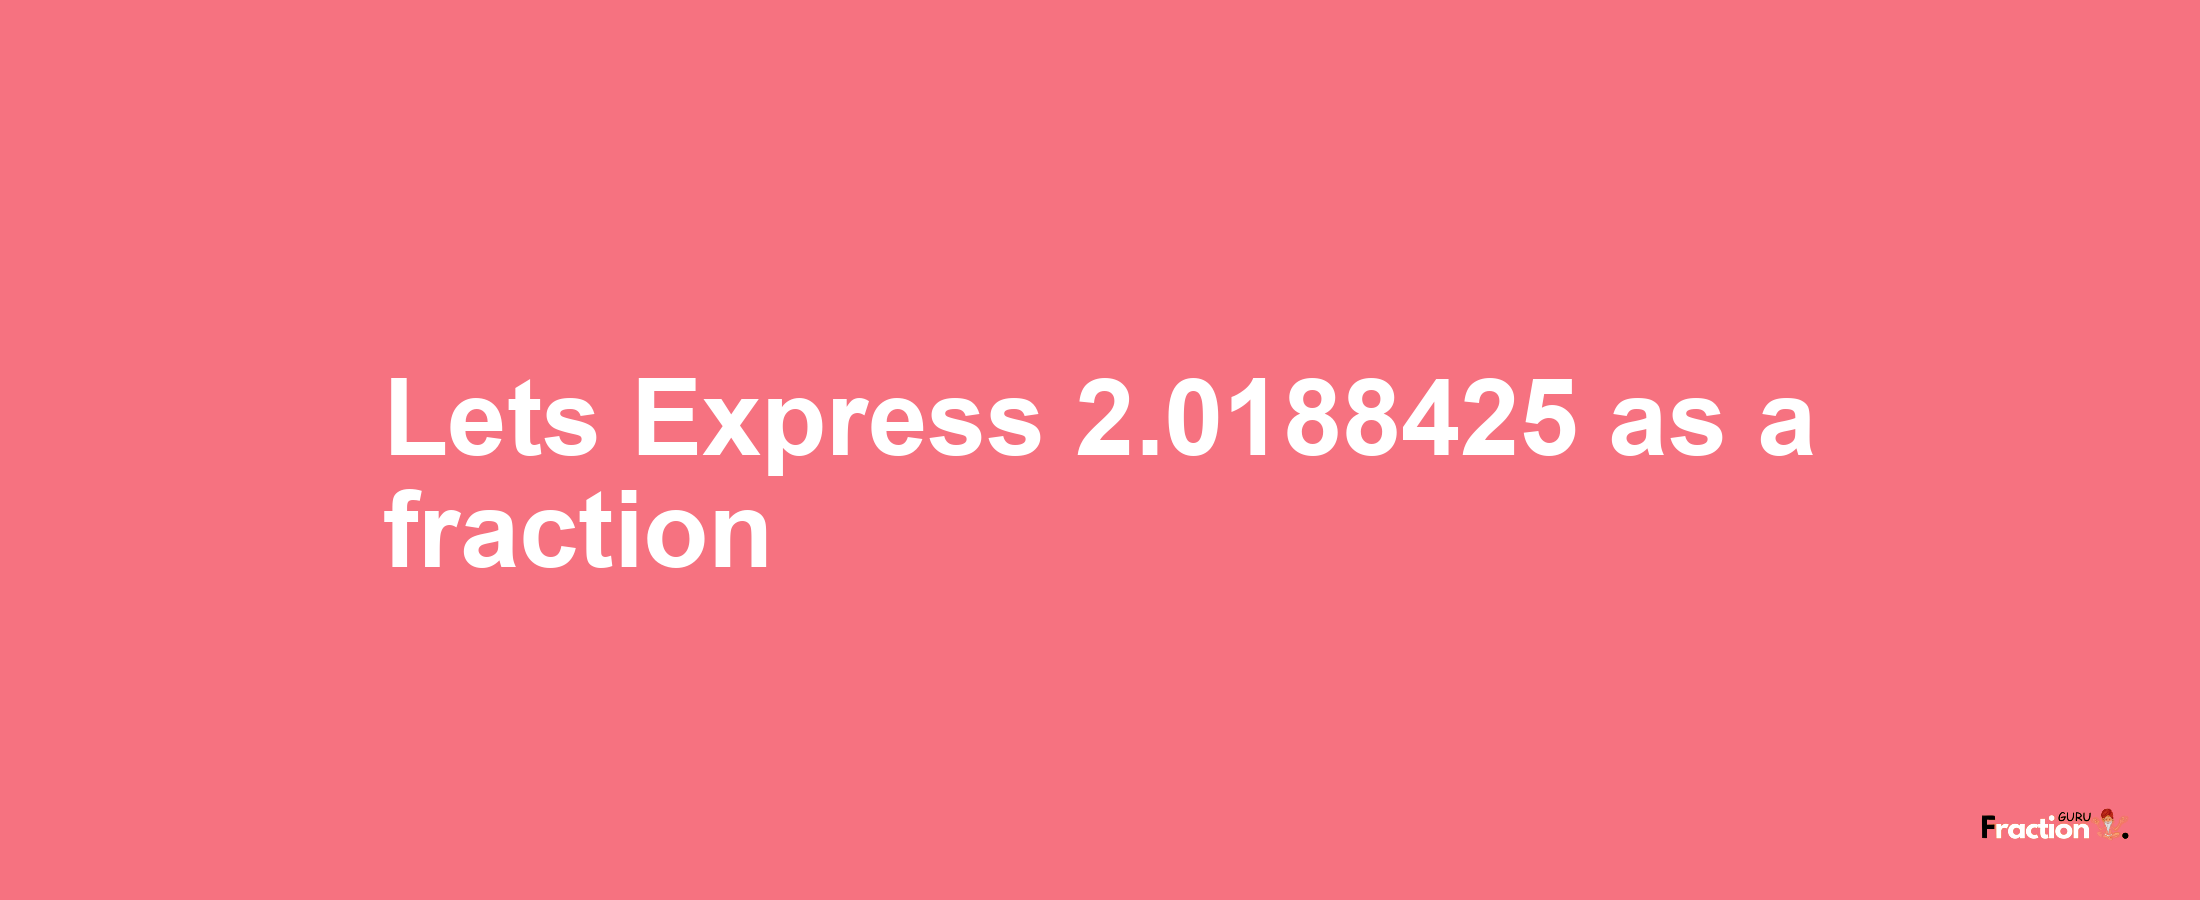 Lets Express 2.0188425 as afraction